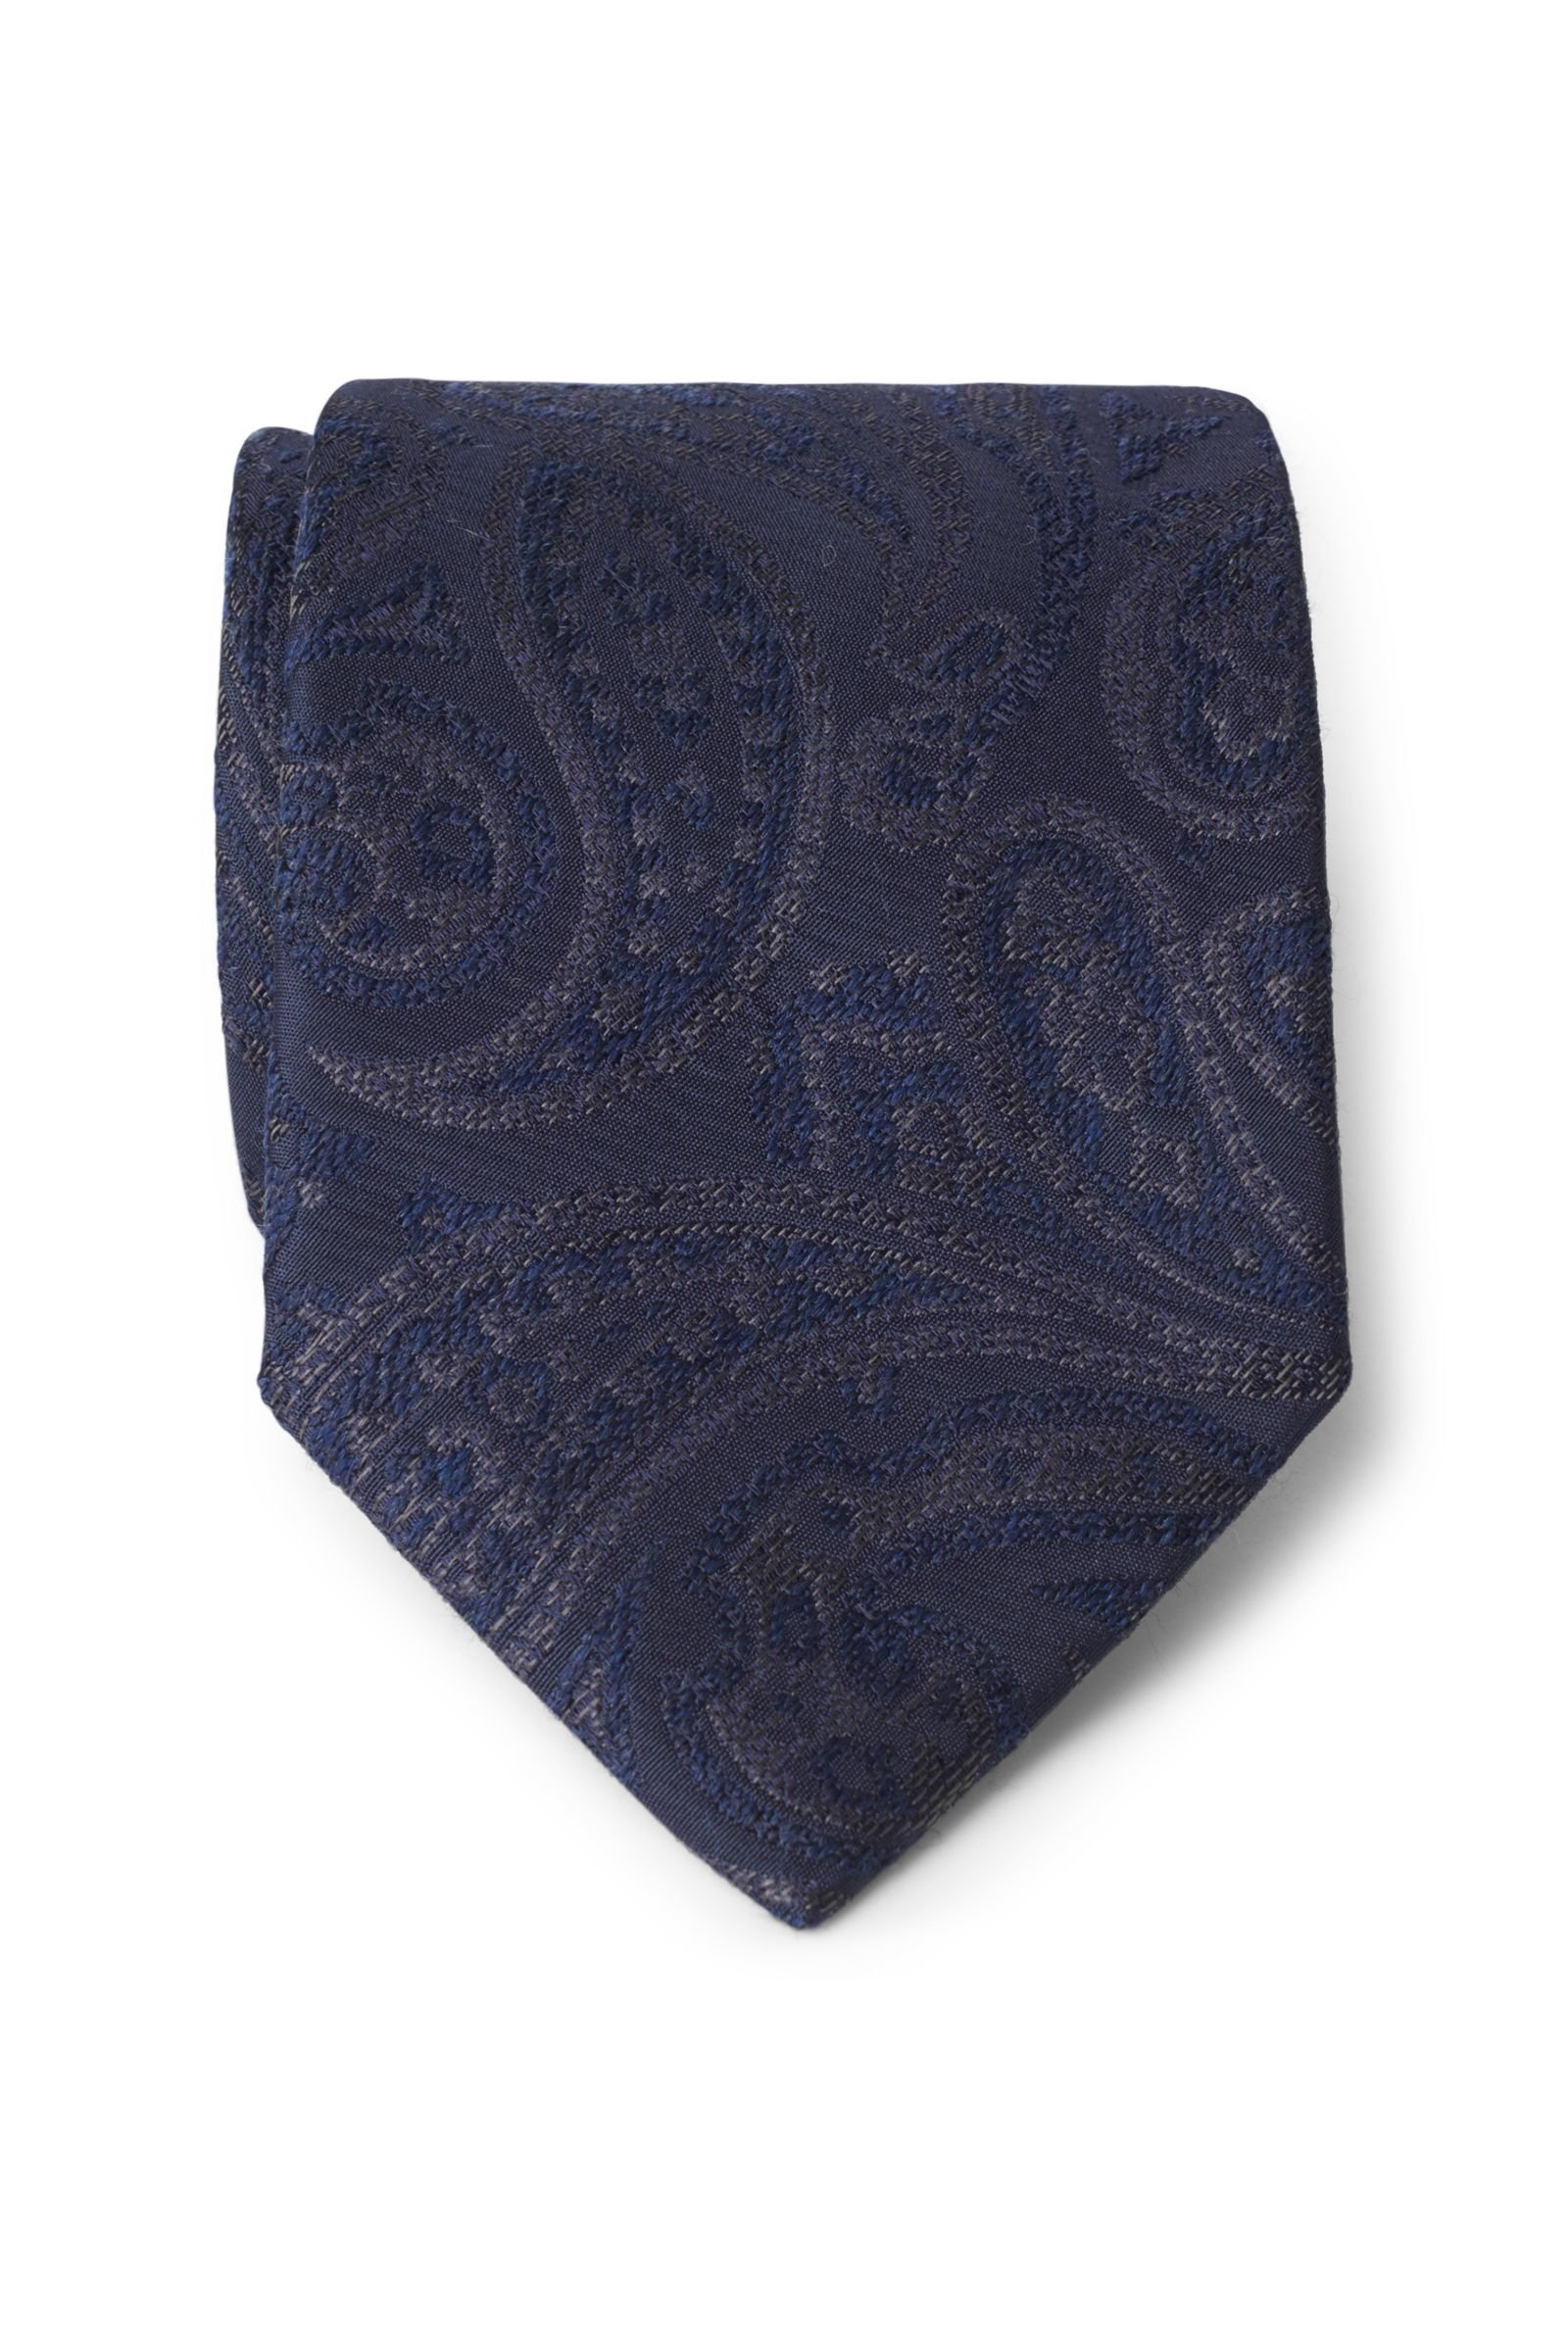 Tie navy patterned